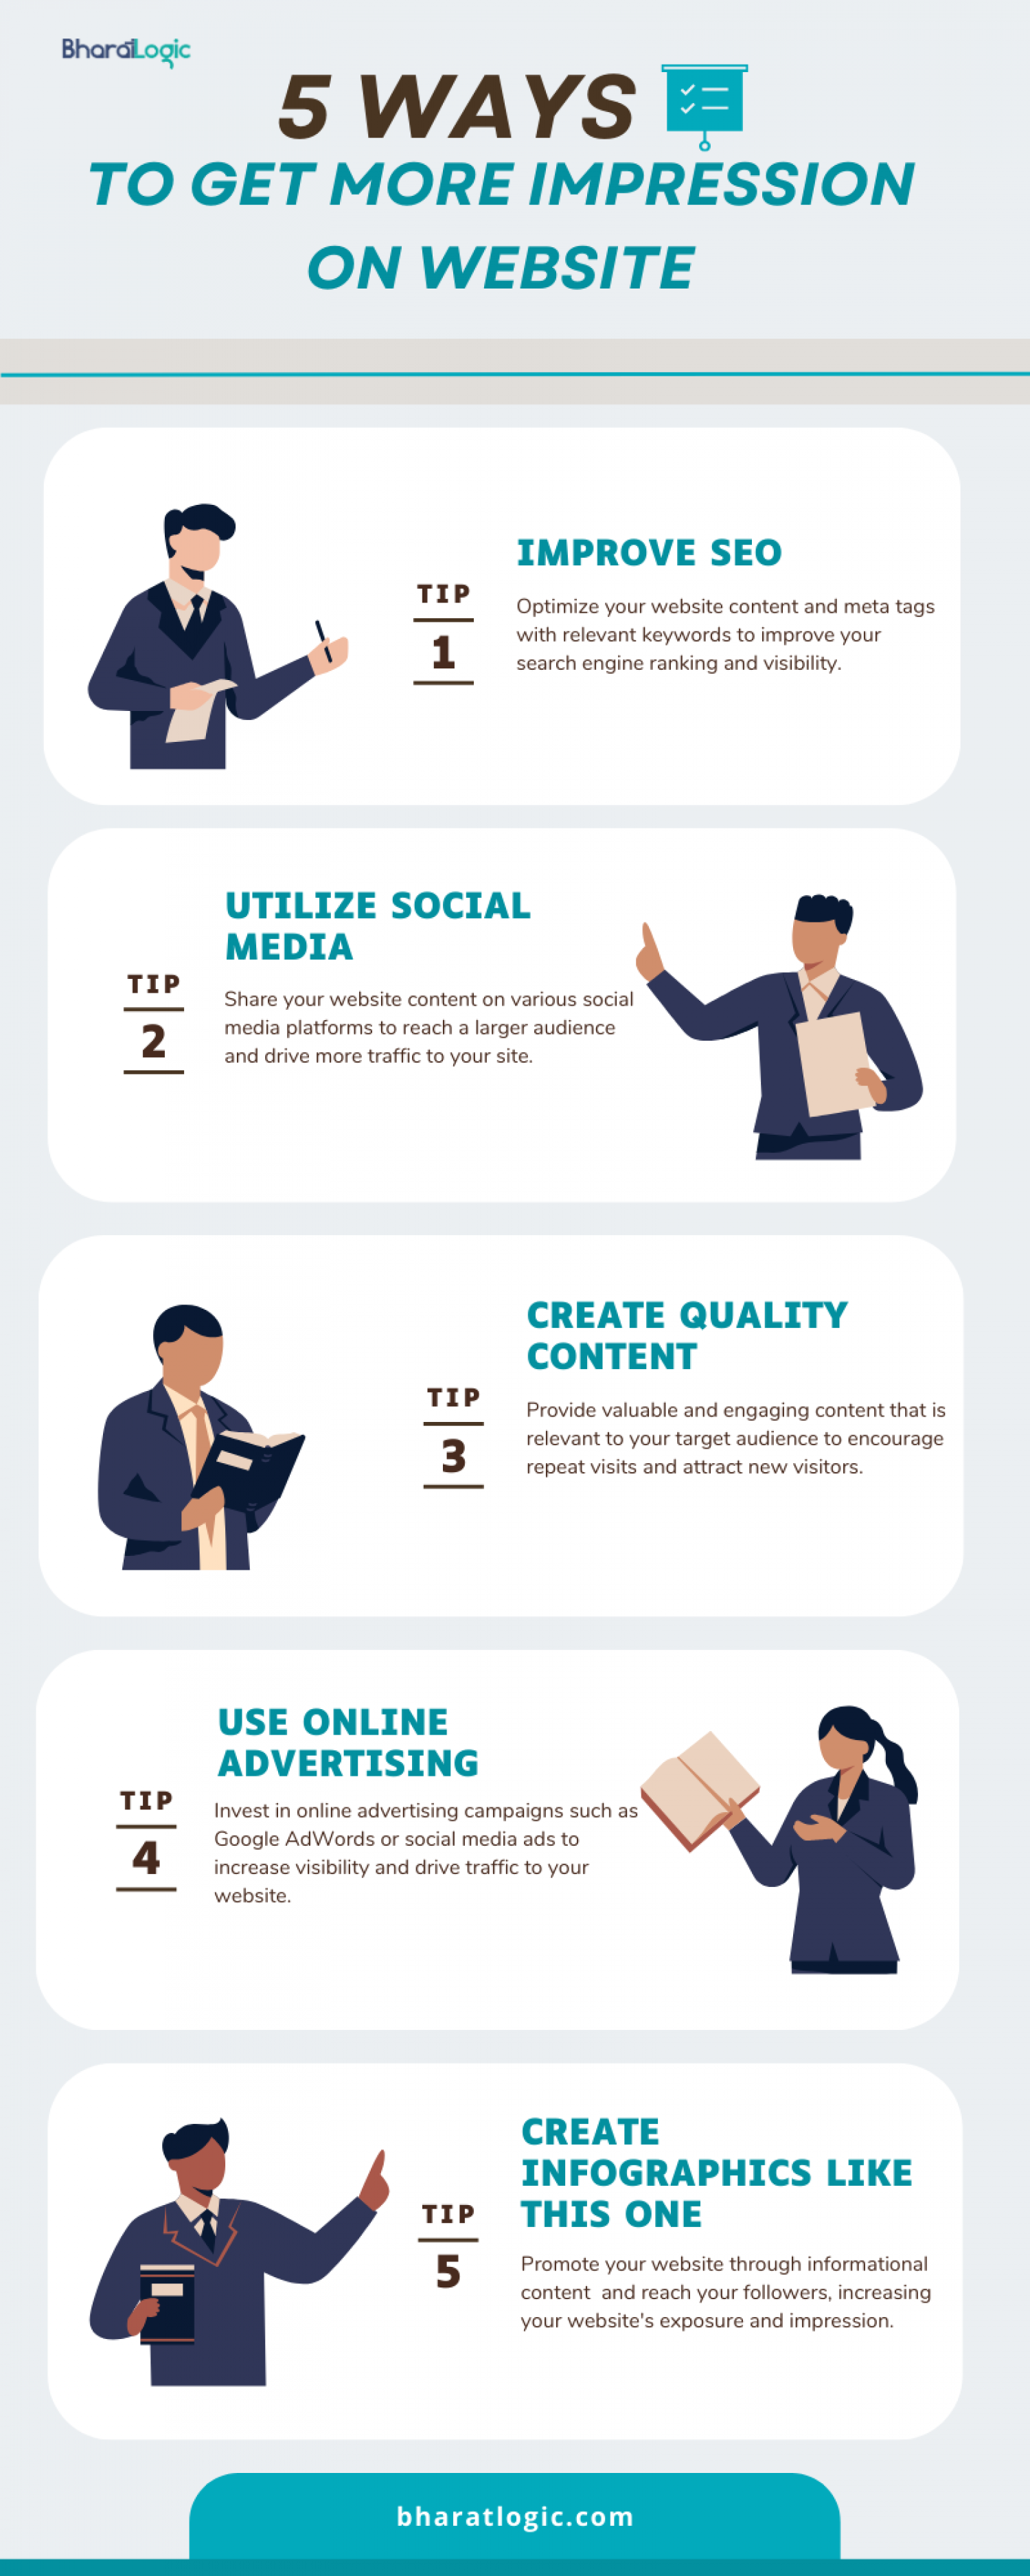 How to Get More Impression on Website Infographic